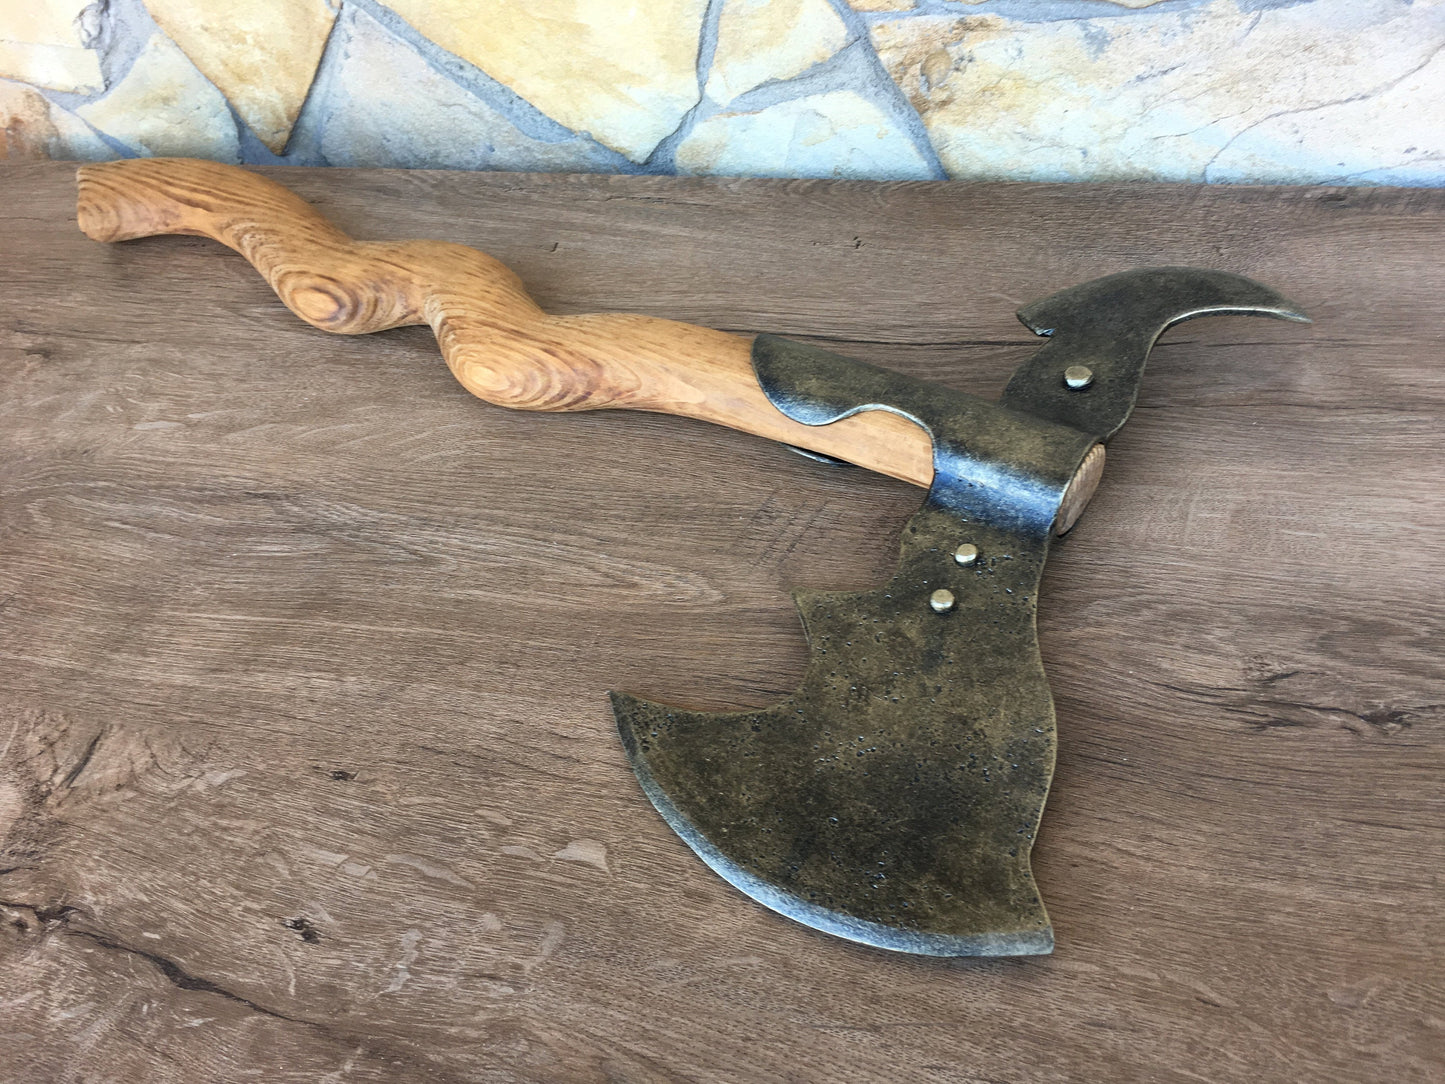 Decorative axe, viking axe, hand forged axe, tomahawk, hatchet, mens gifts, medieval axe, axe gift, viking style gift, viking gifts, ax